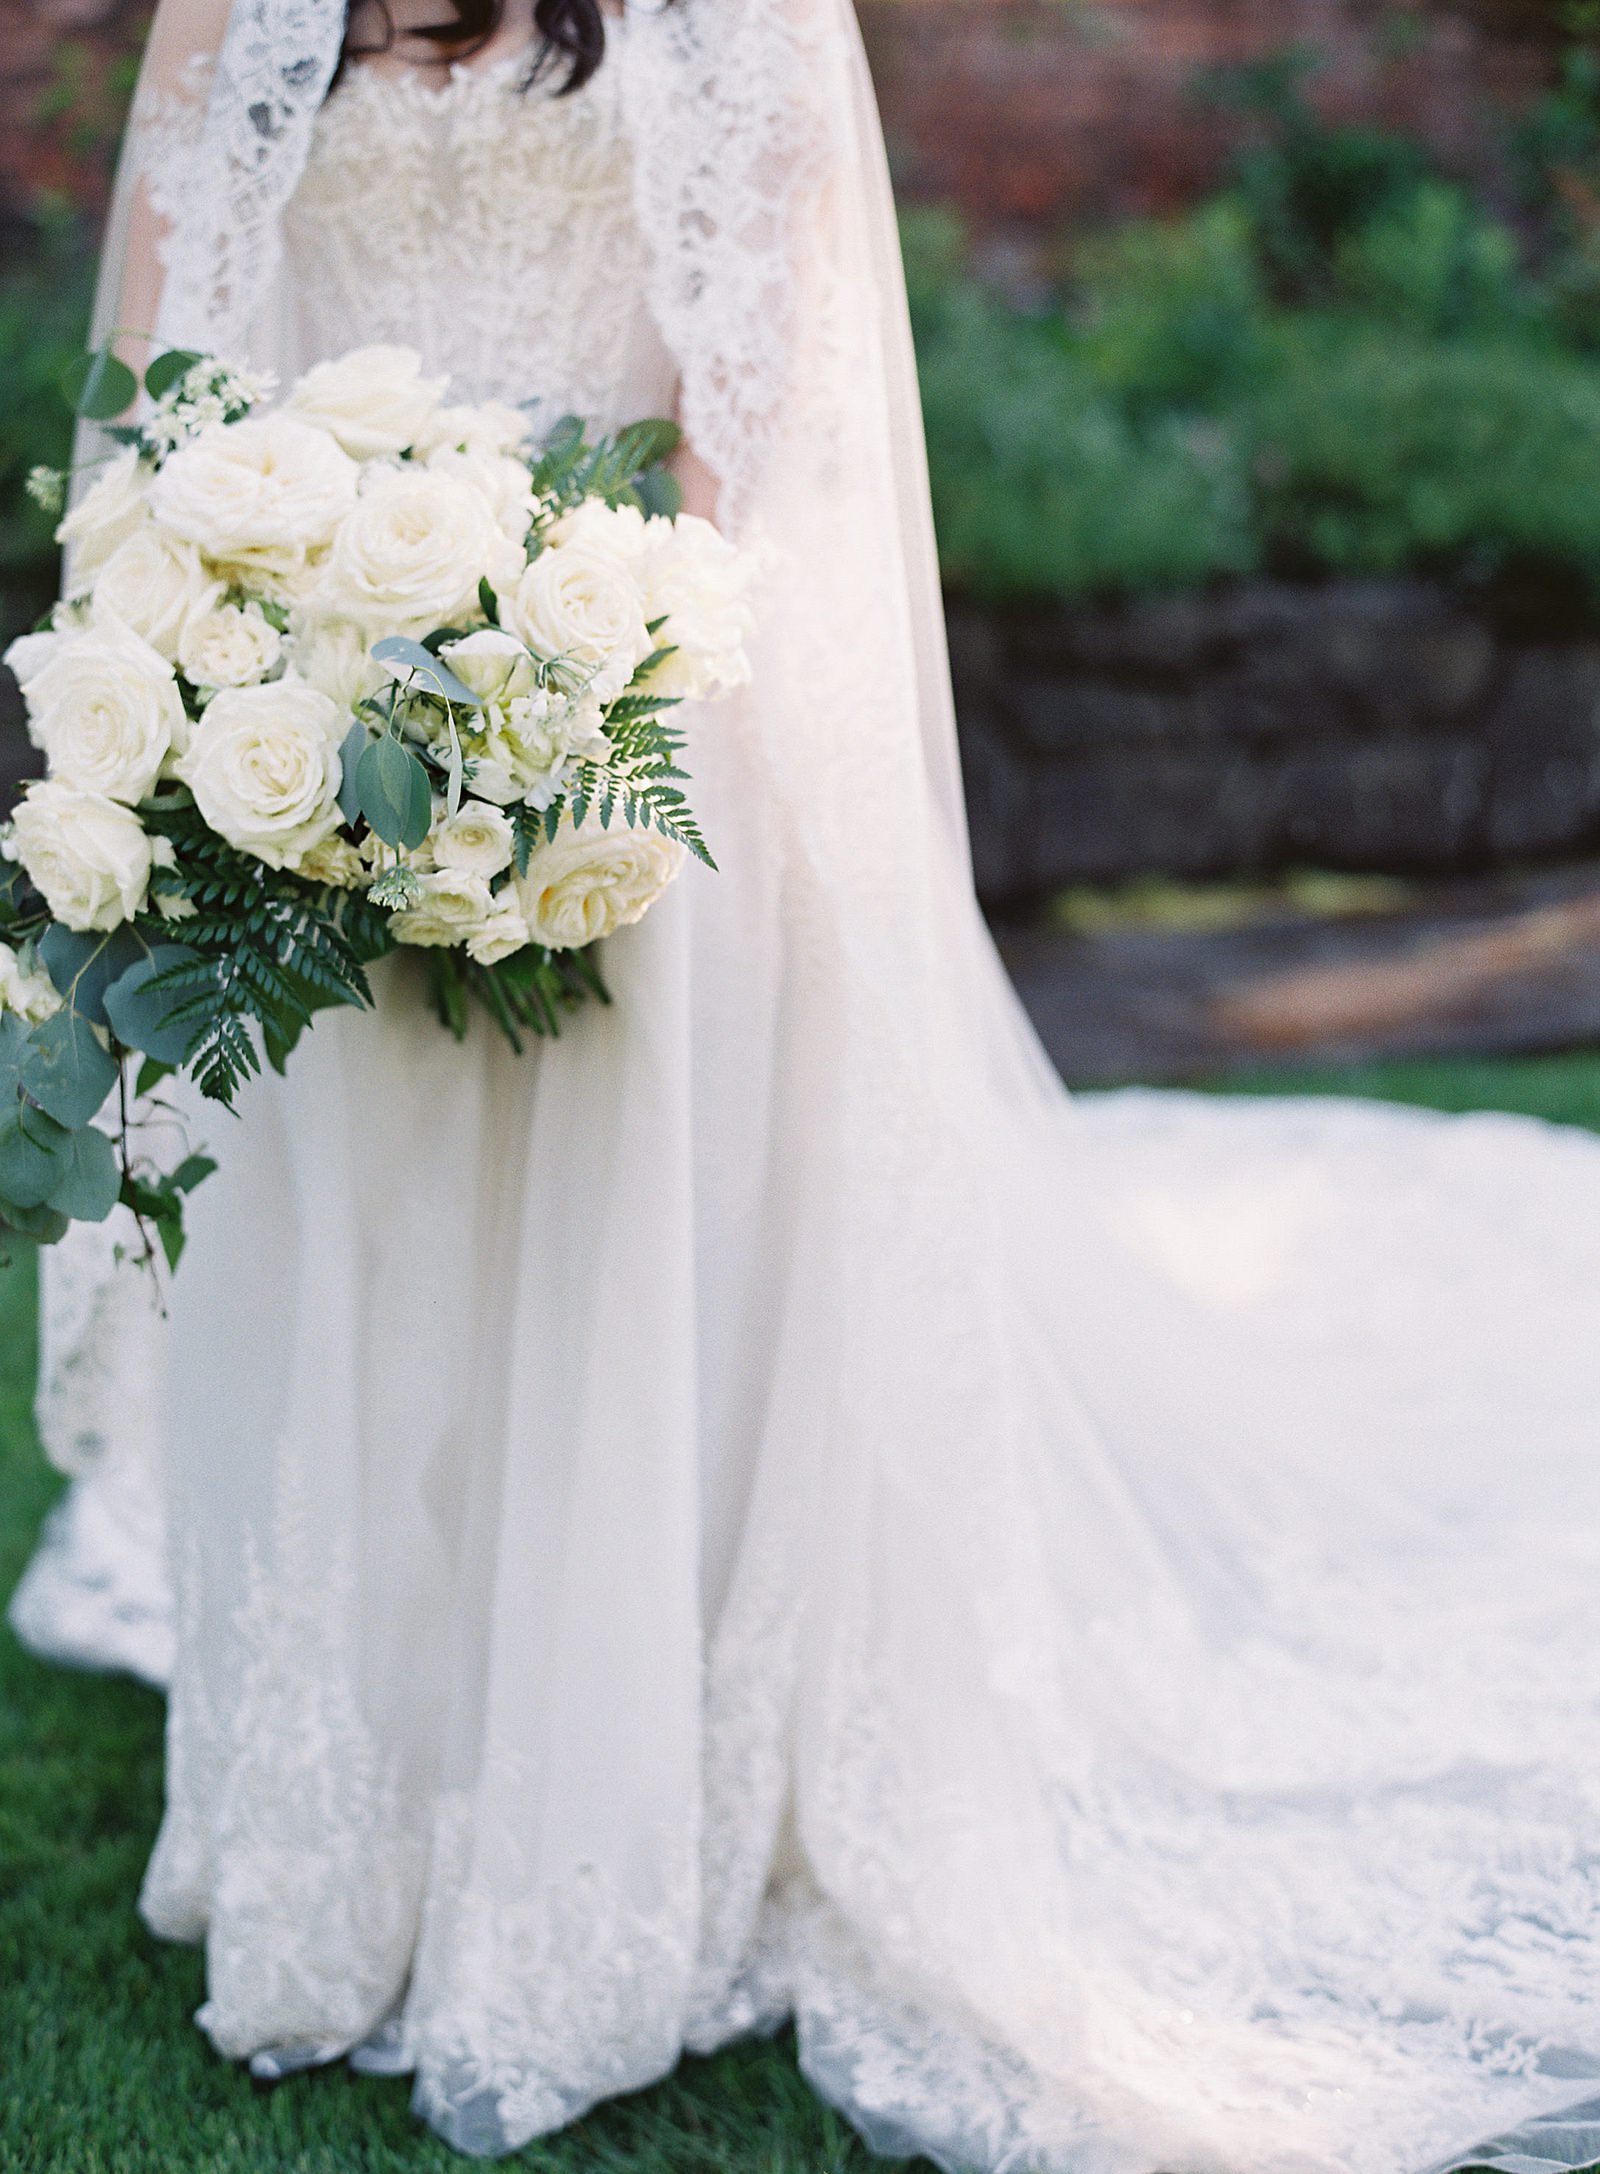 White bridal bouquet with lace wedding gown and veil at Thornewood Castle garden - Jacqueline Benét Photography